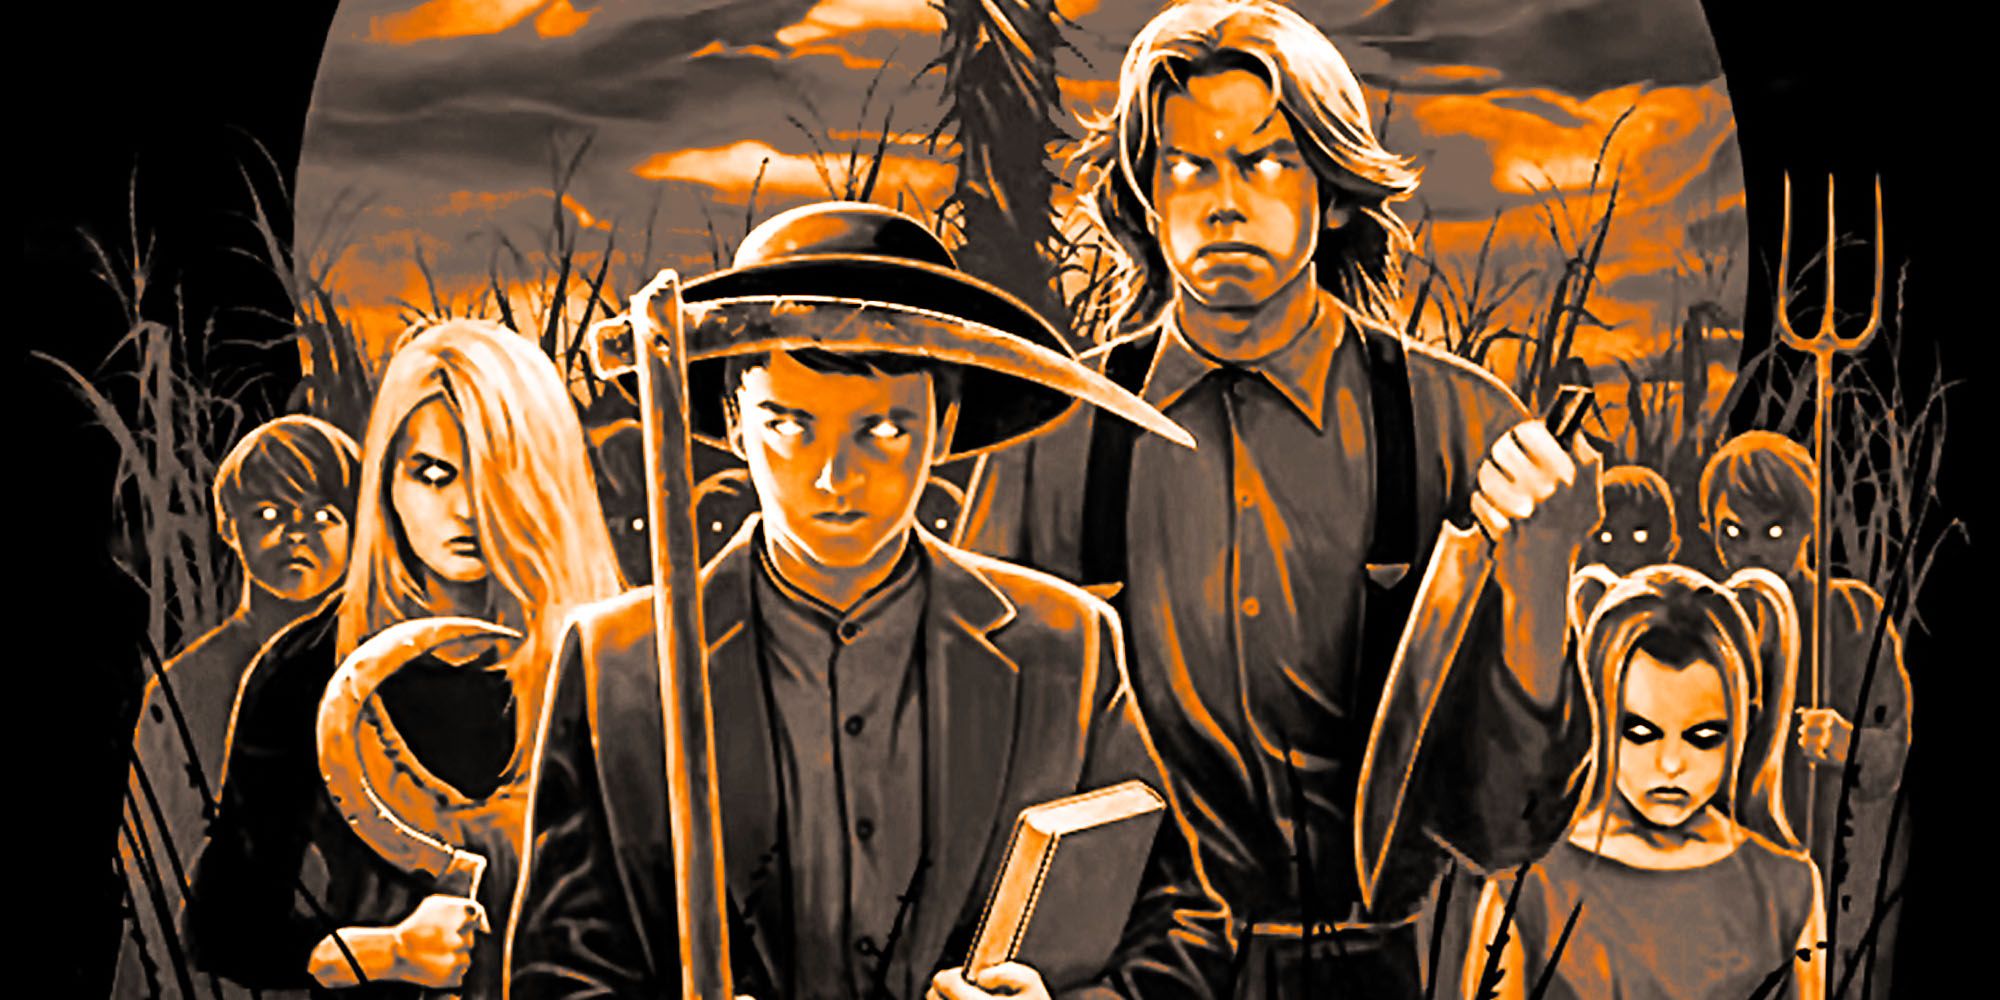 why Stephen Kings Children of the Corn failed